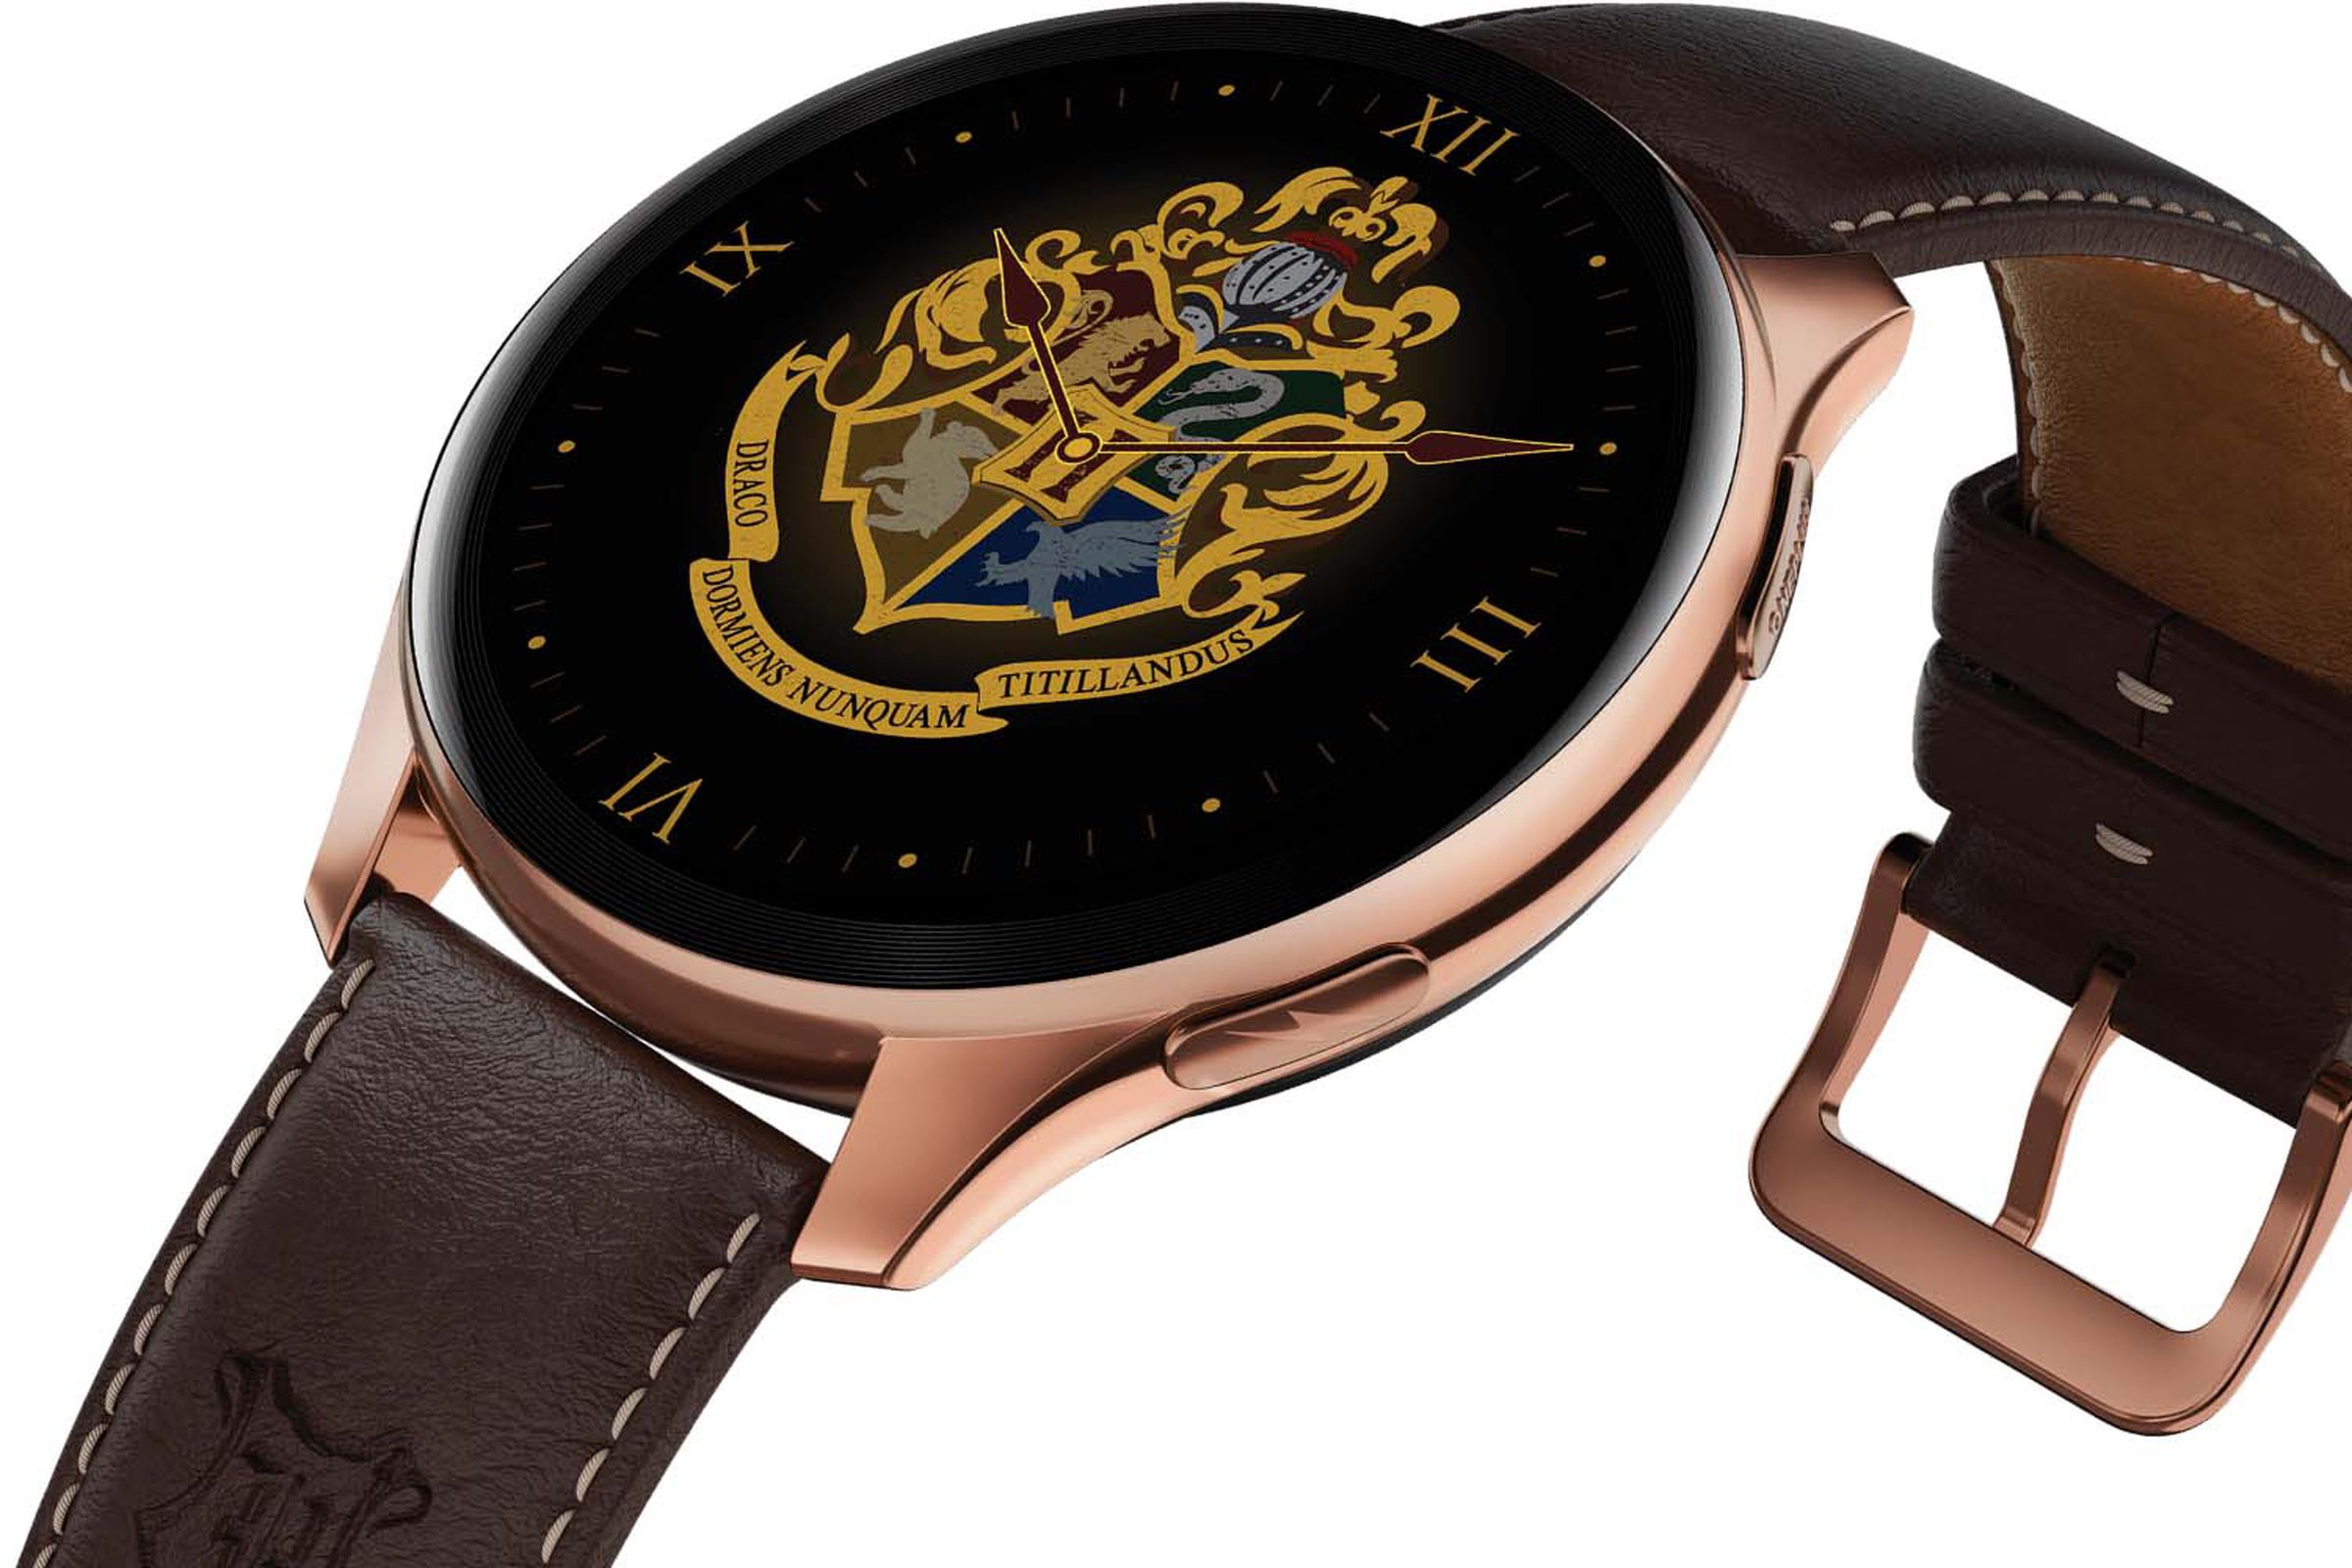 The watch includes custom faces and a Harry Potter-themed design.